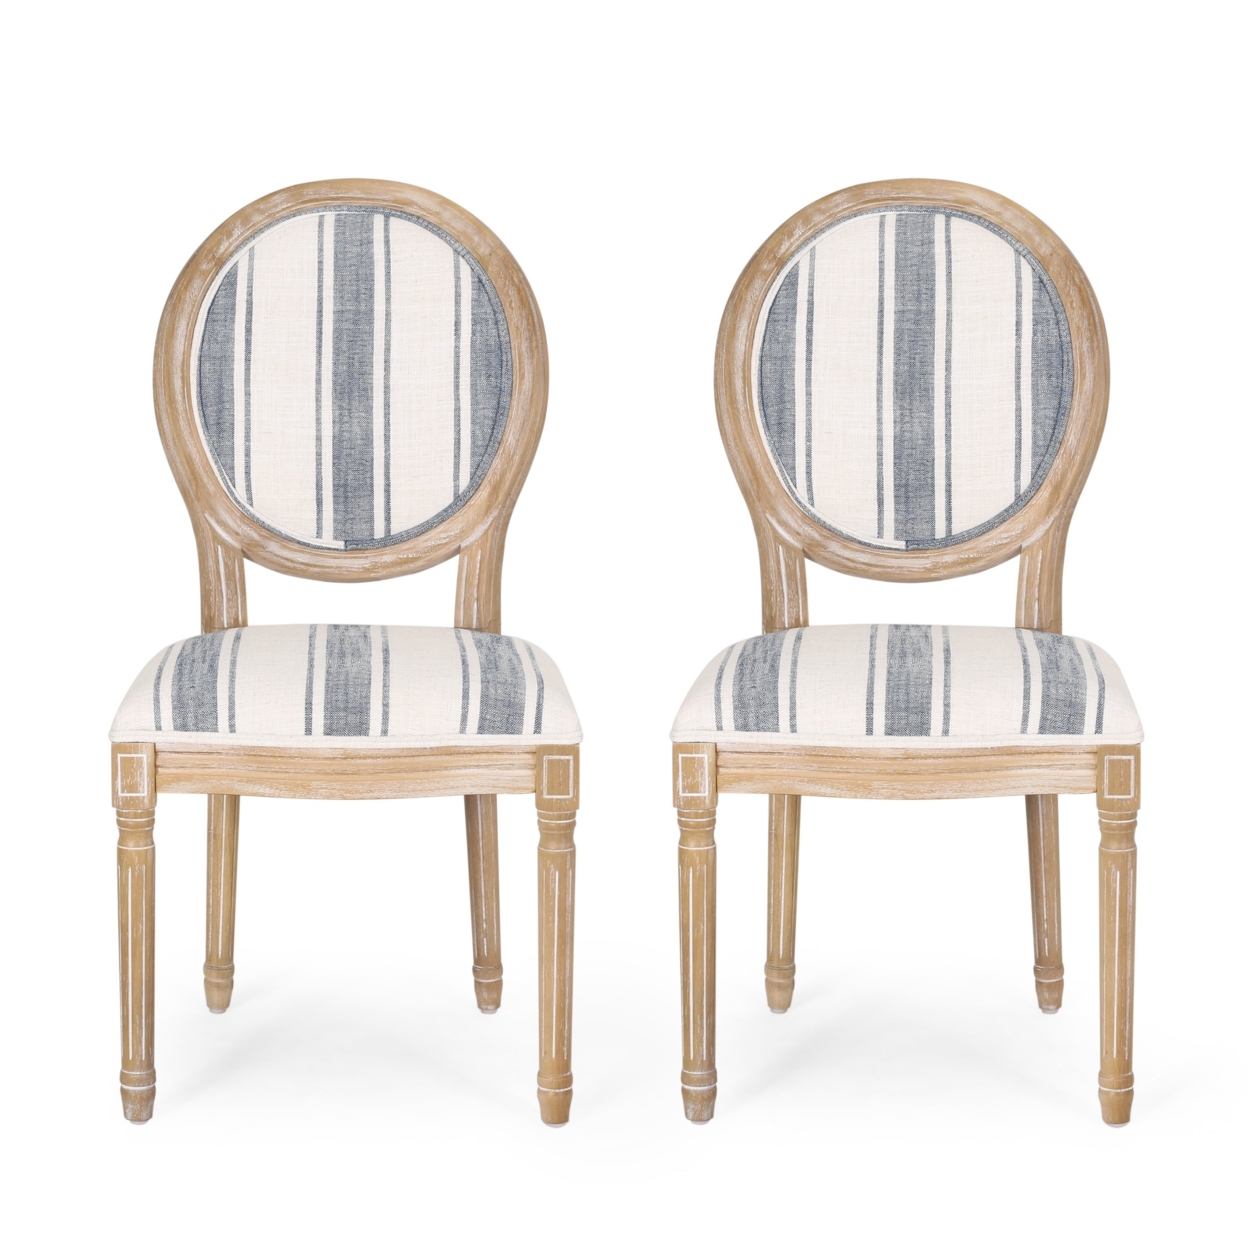 Lariya French Country Fabric Dining Chairs - Grey Line, Set Of 4